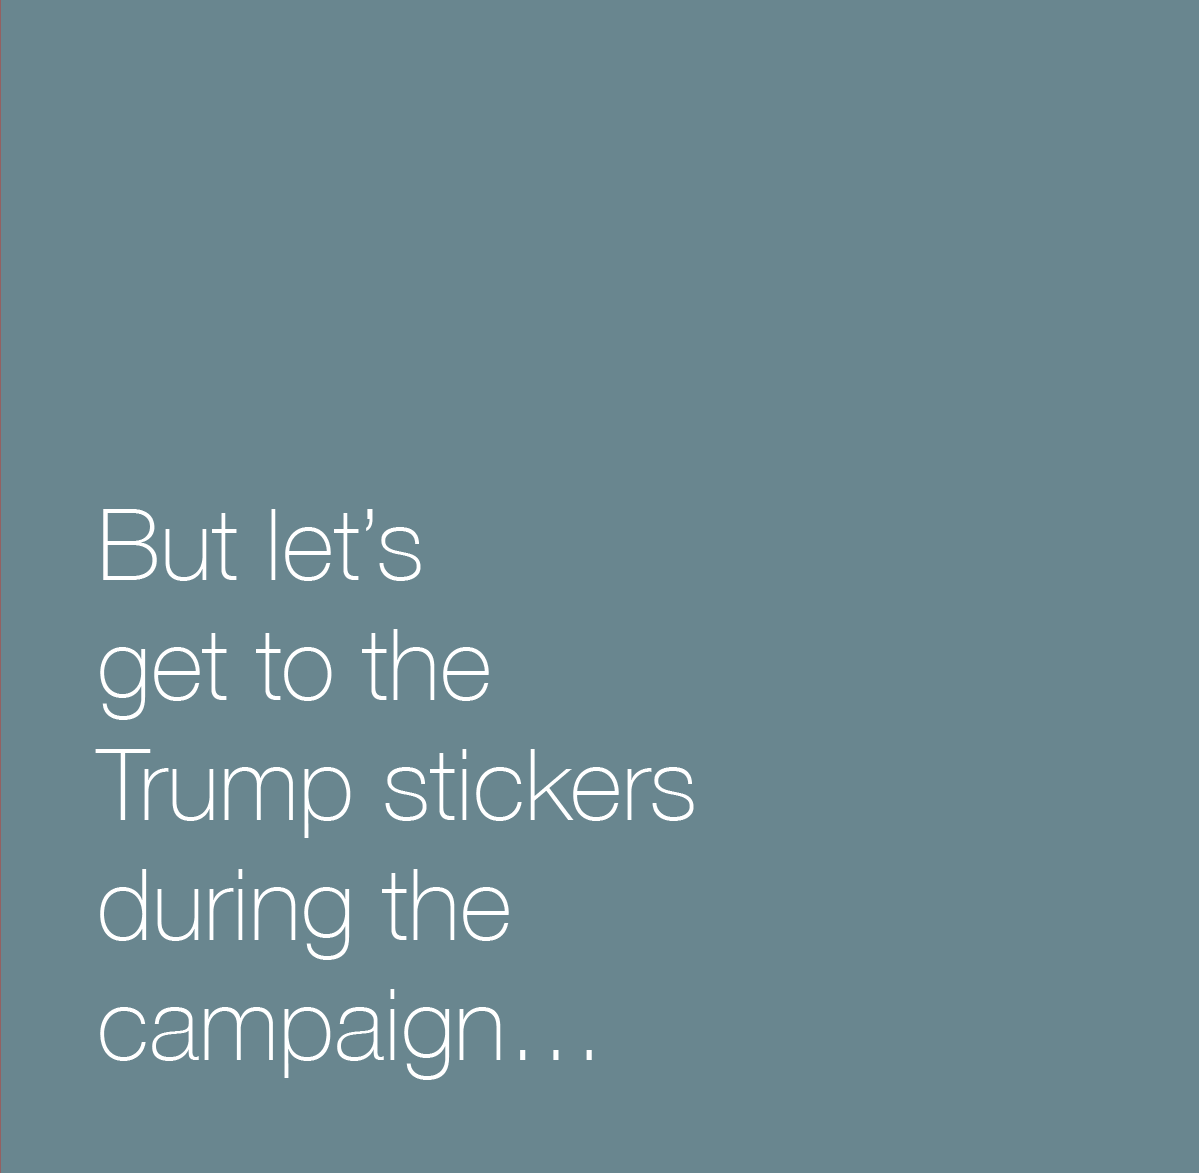 But let's get to the Trump stickers during the 2016 campaign